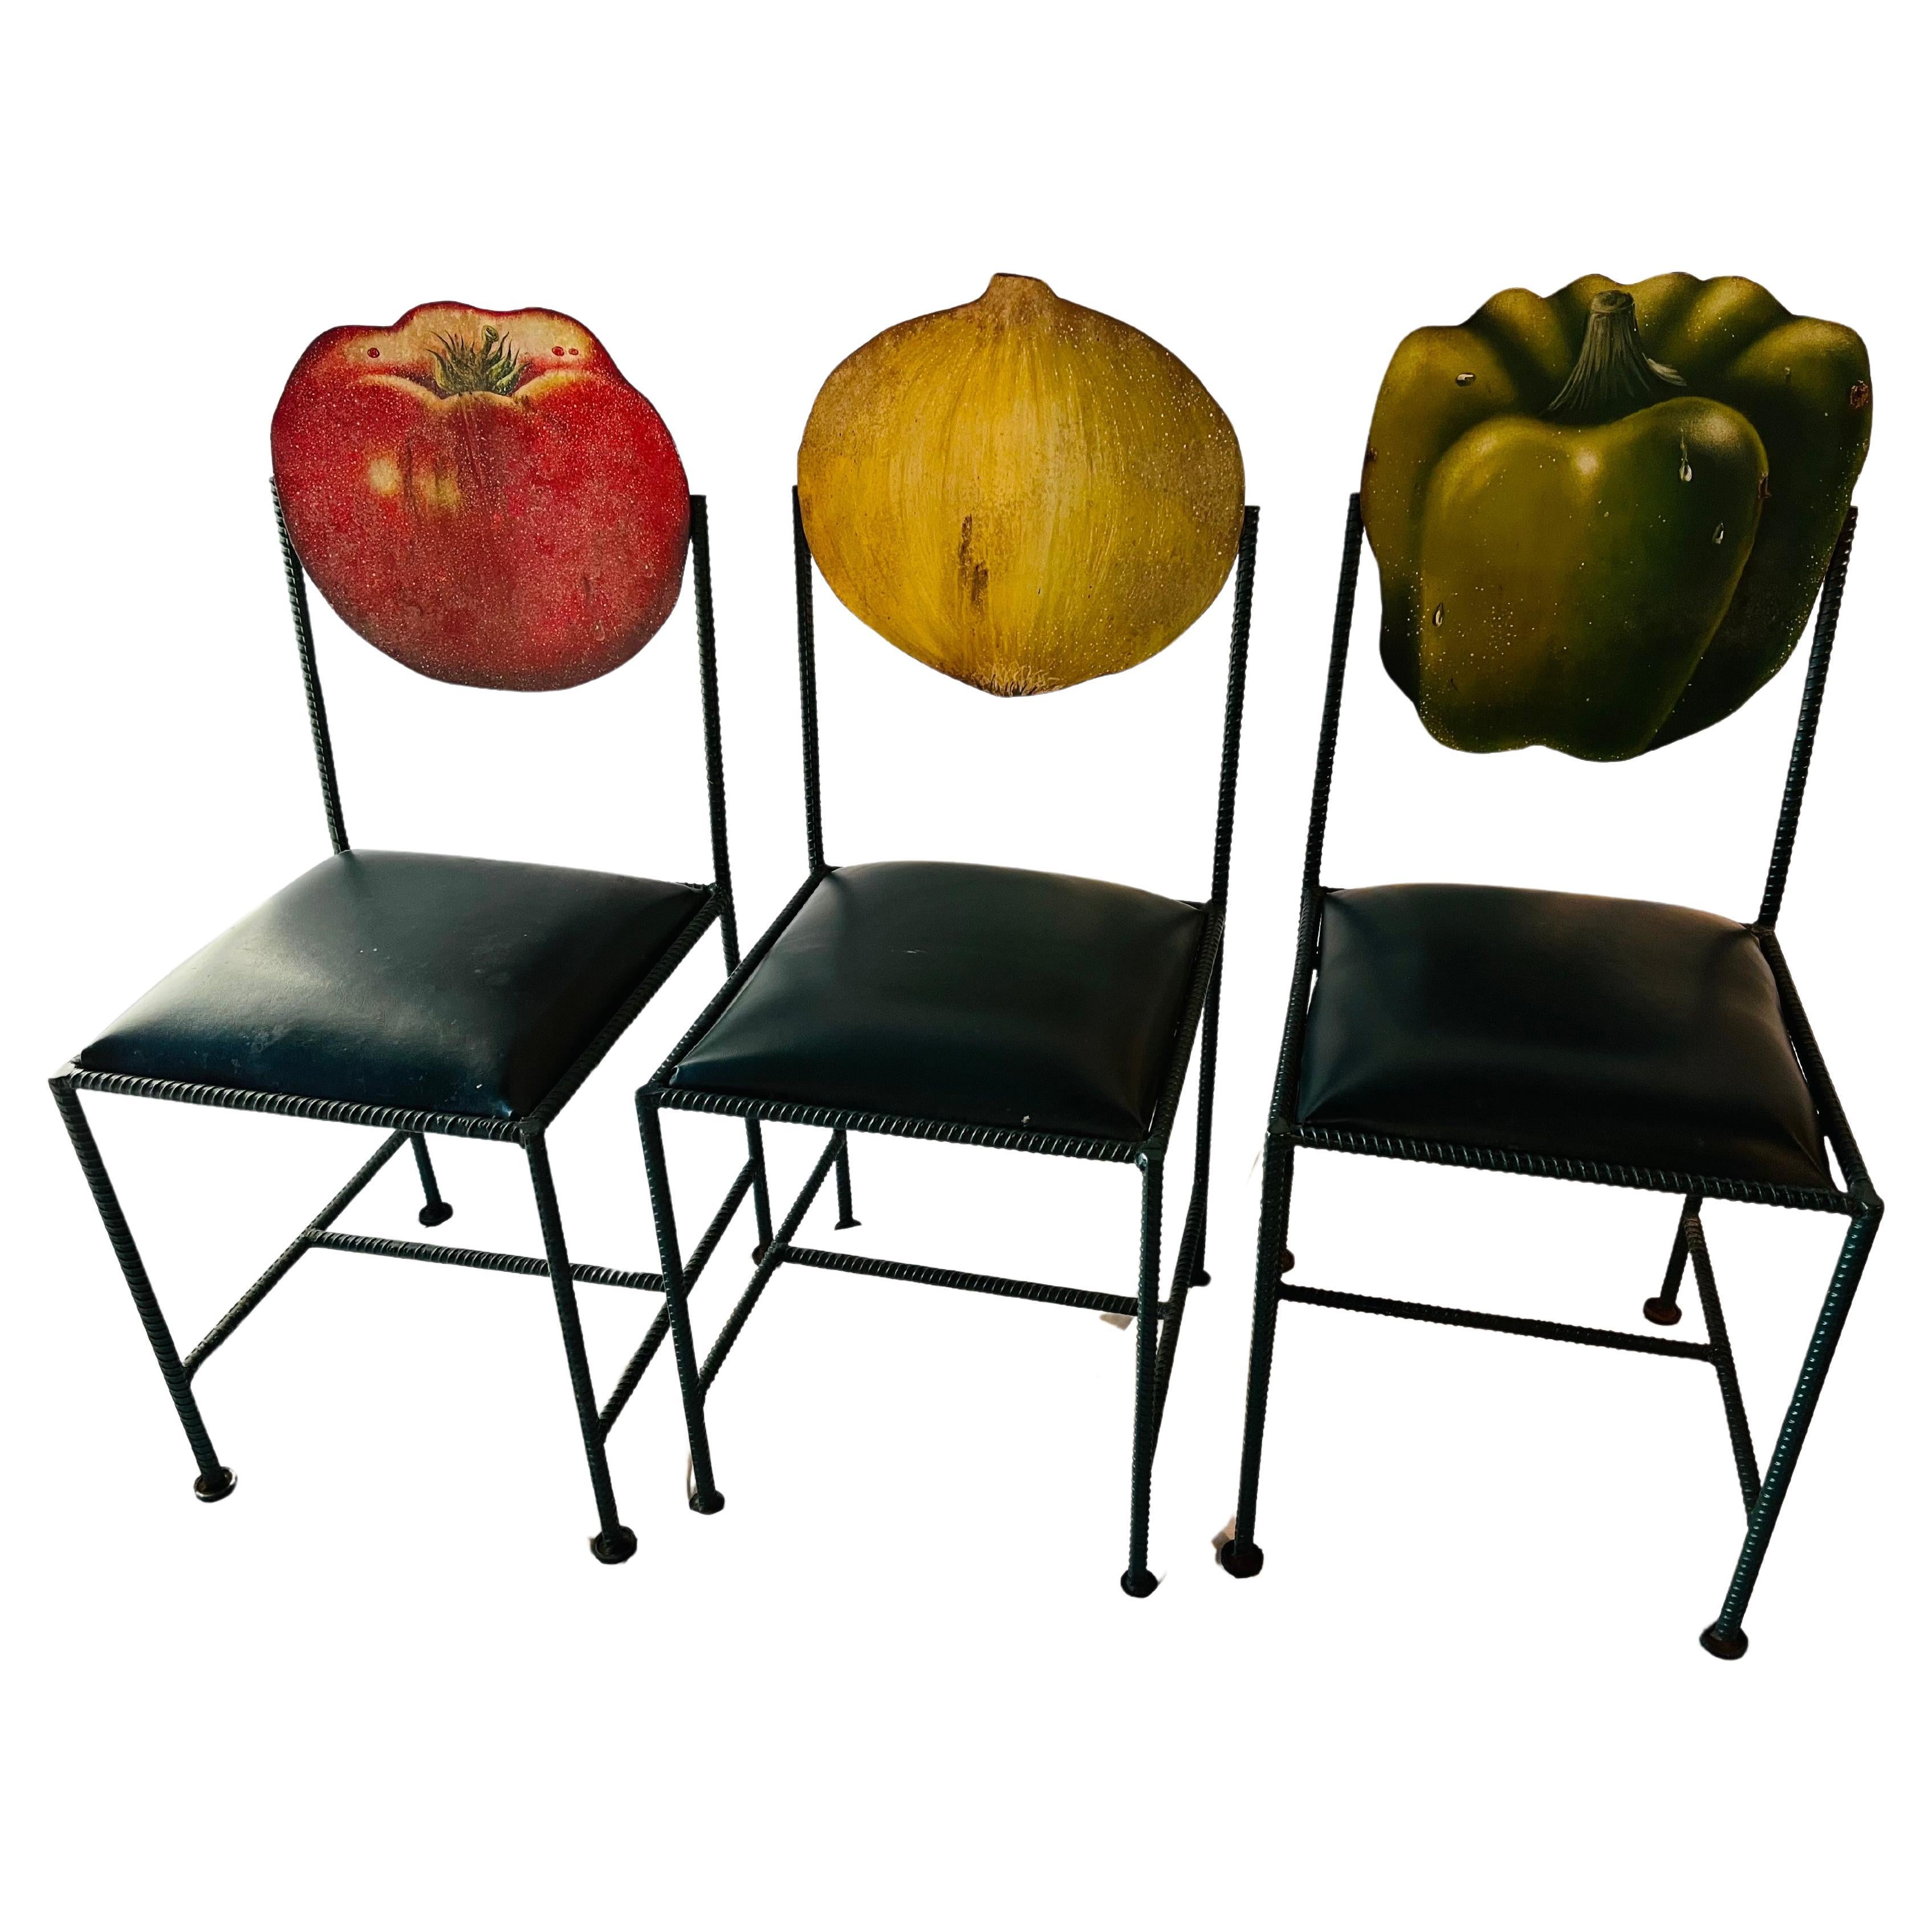 Artist Made Hand Painted and Signed Unique Set of Three Vegetable Garden Chairs